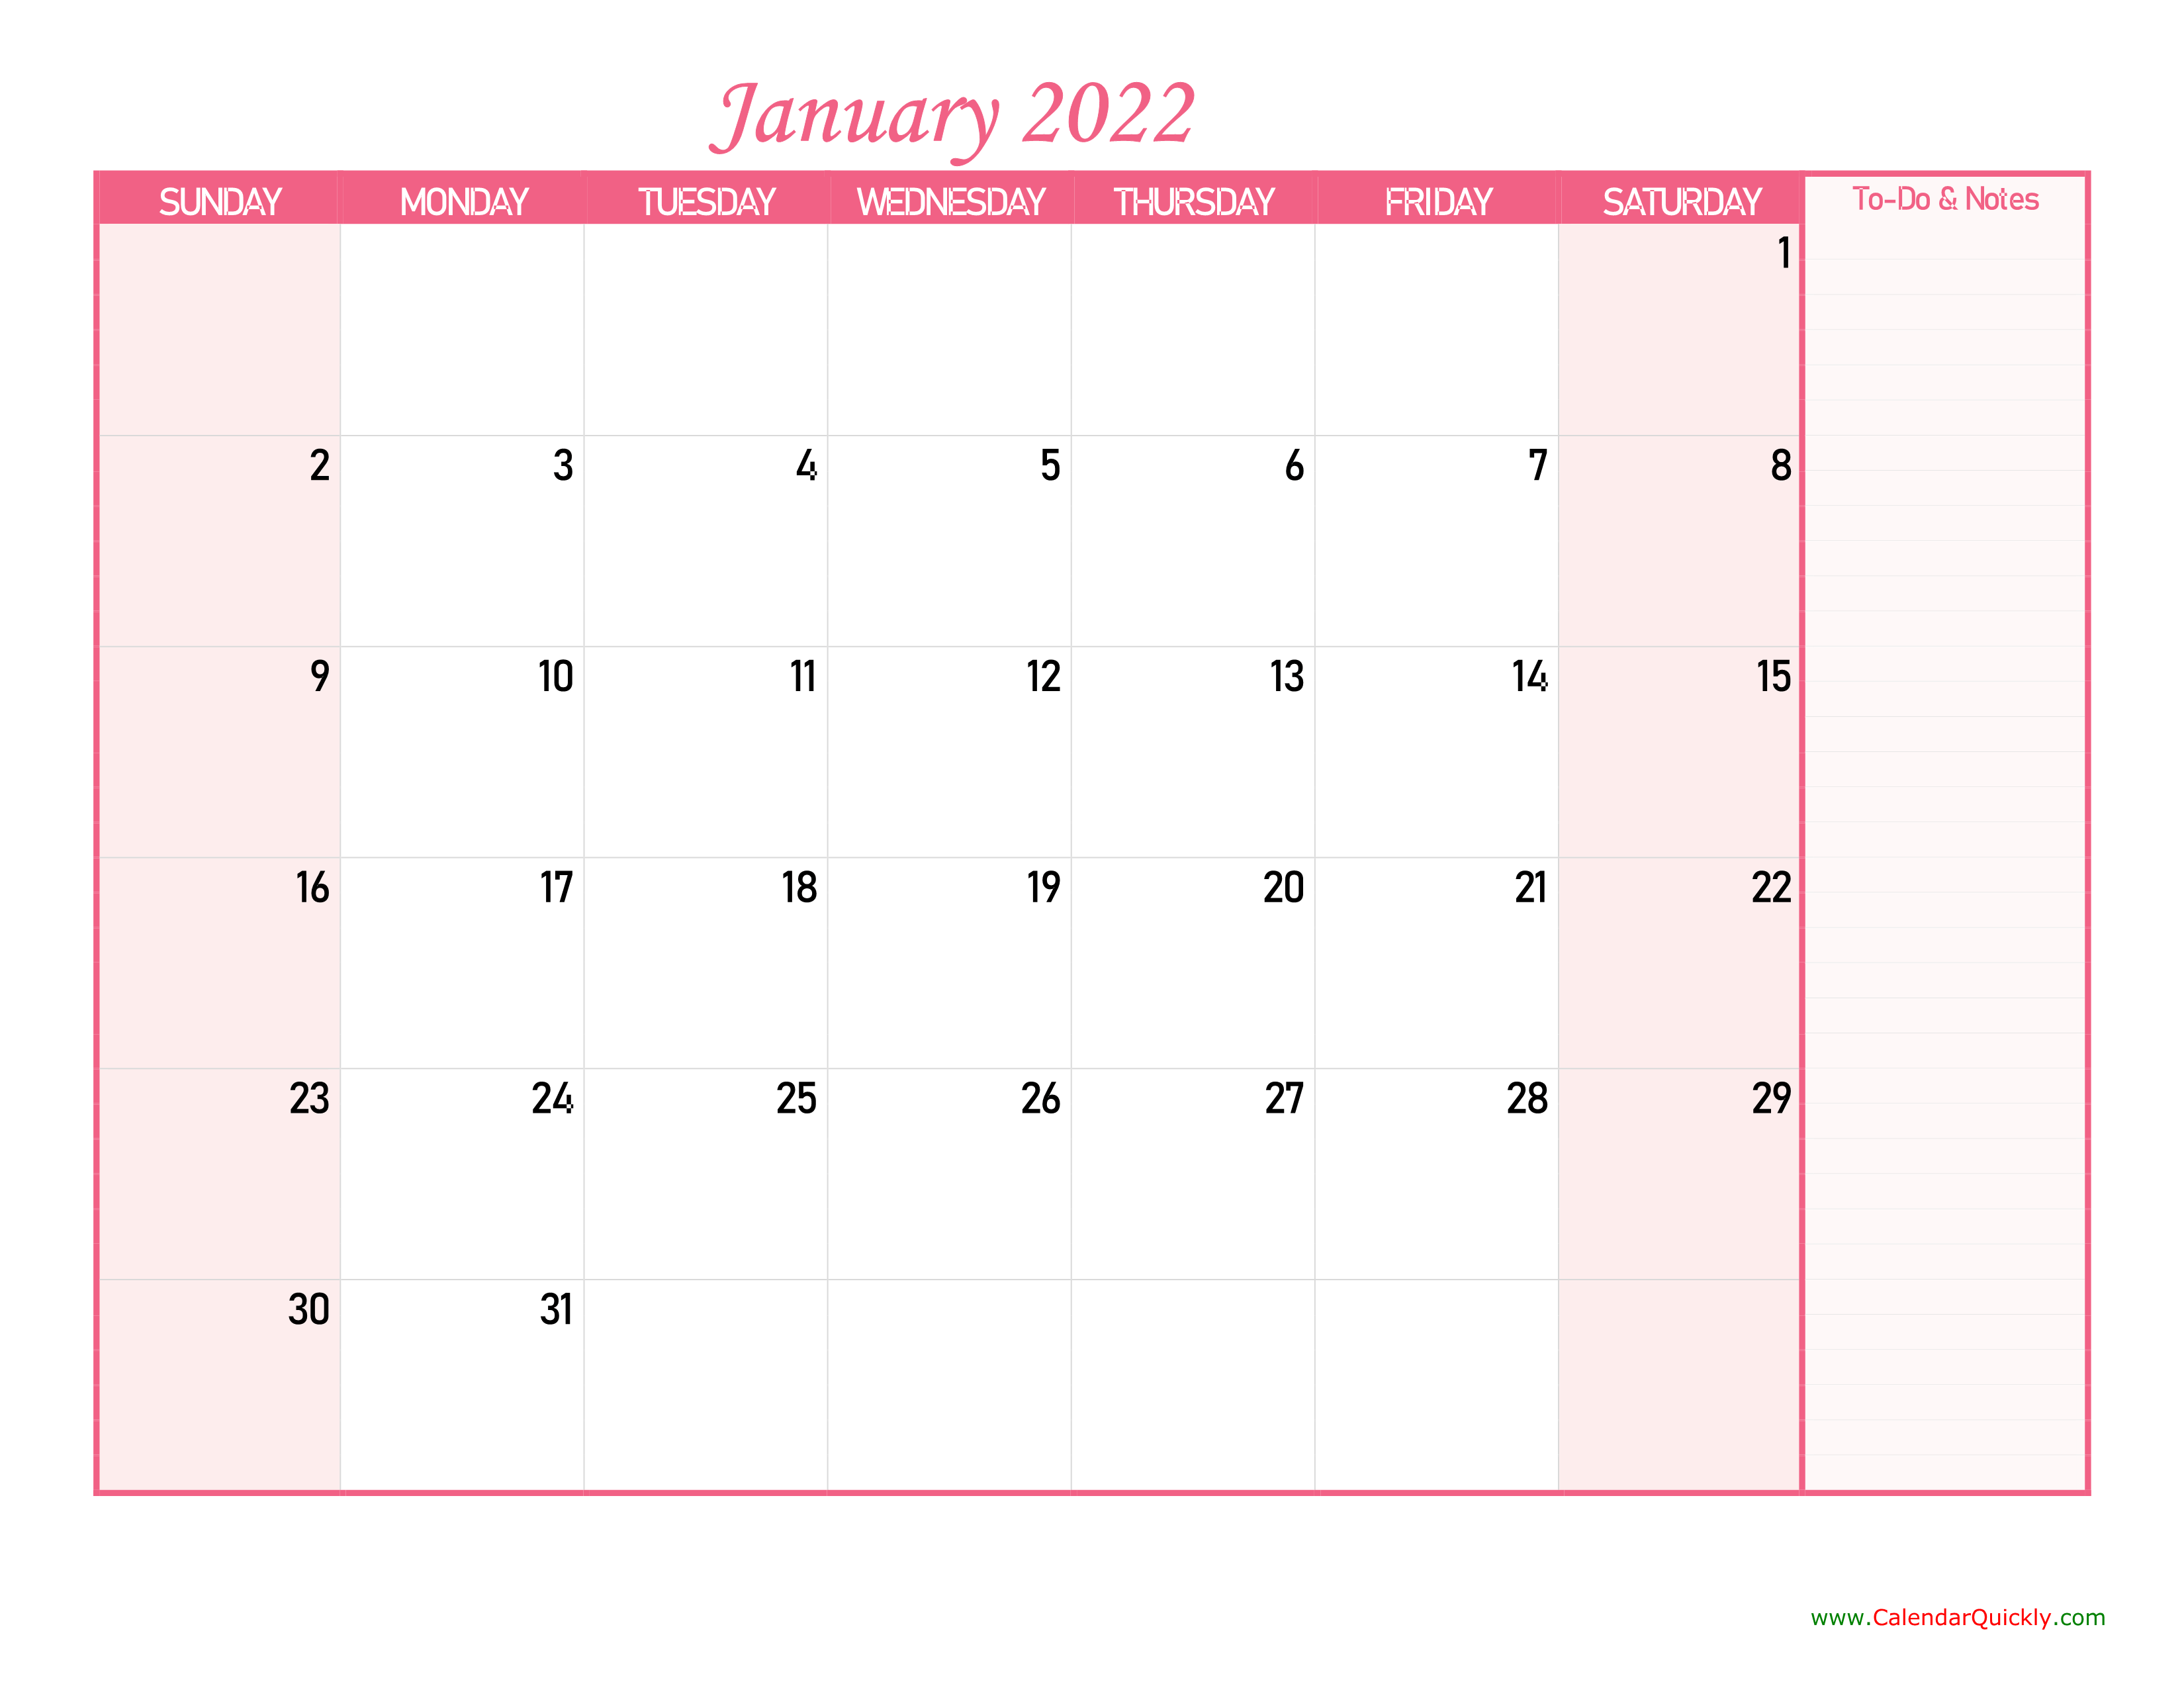 monthly-calendar-2022-with-notes-calendar-quickly